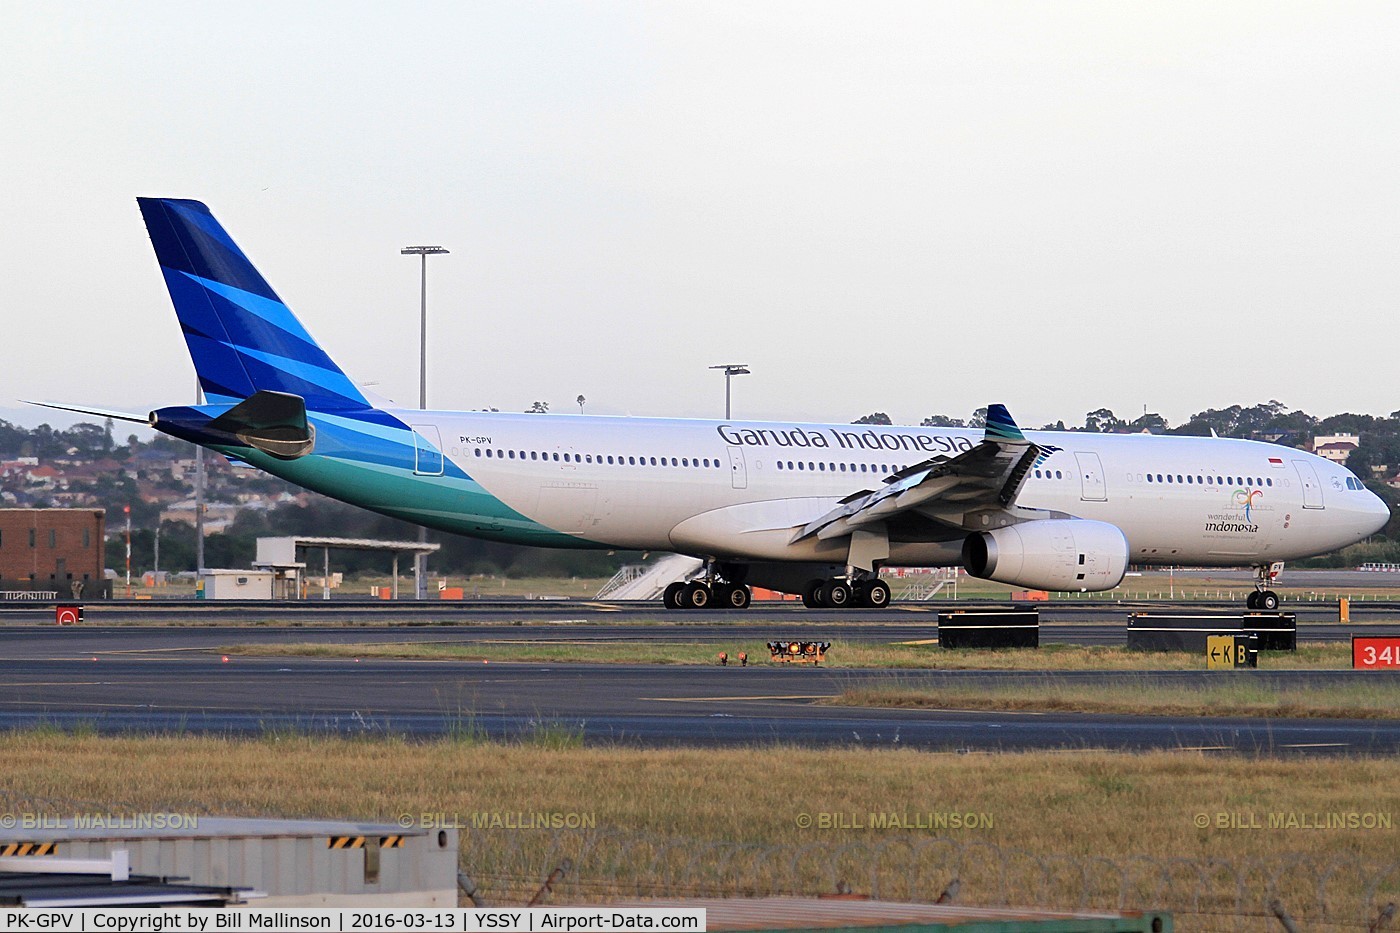 PK-GPV, 2014 Airbus A330-343 C/N 1577, in from CGK